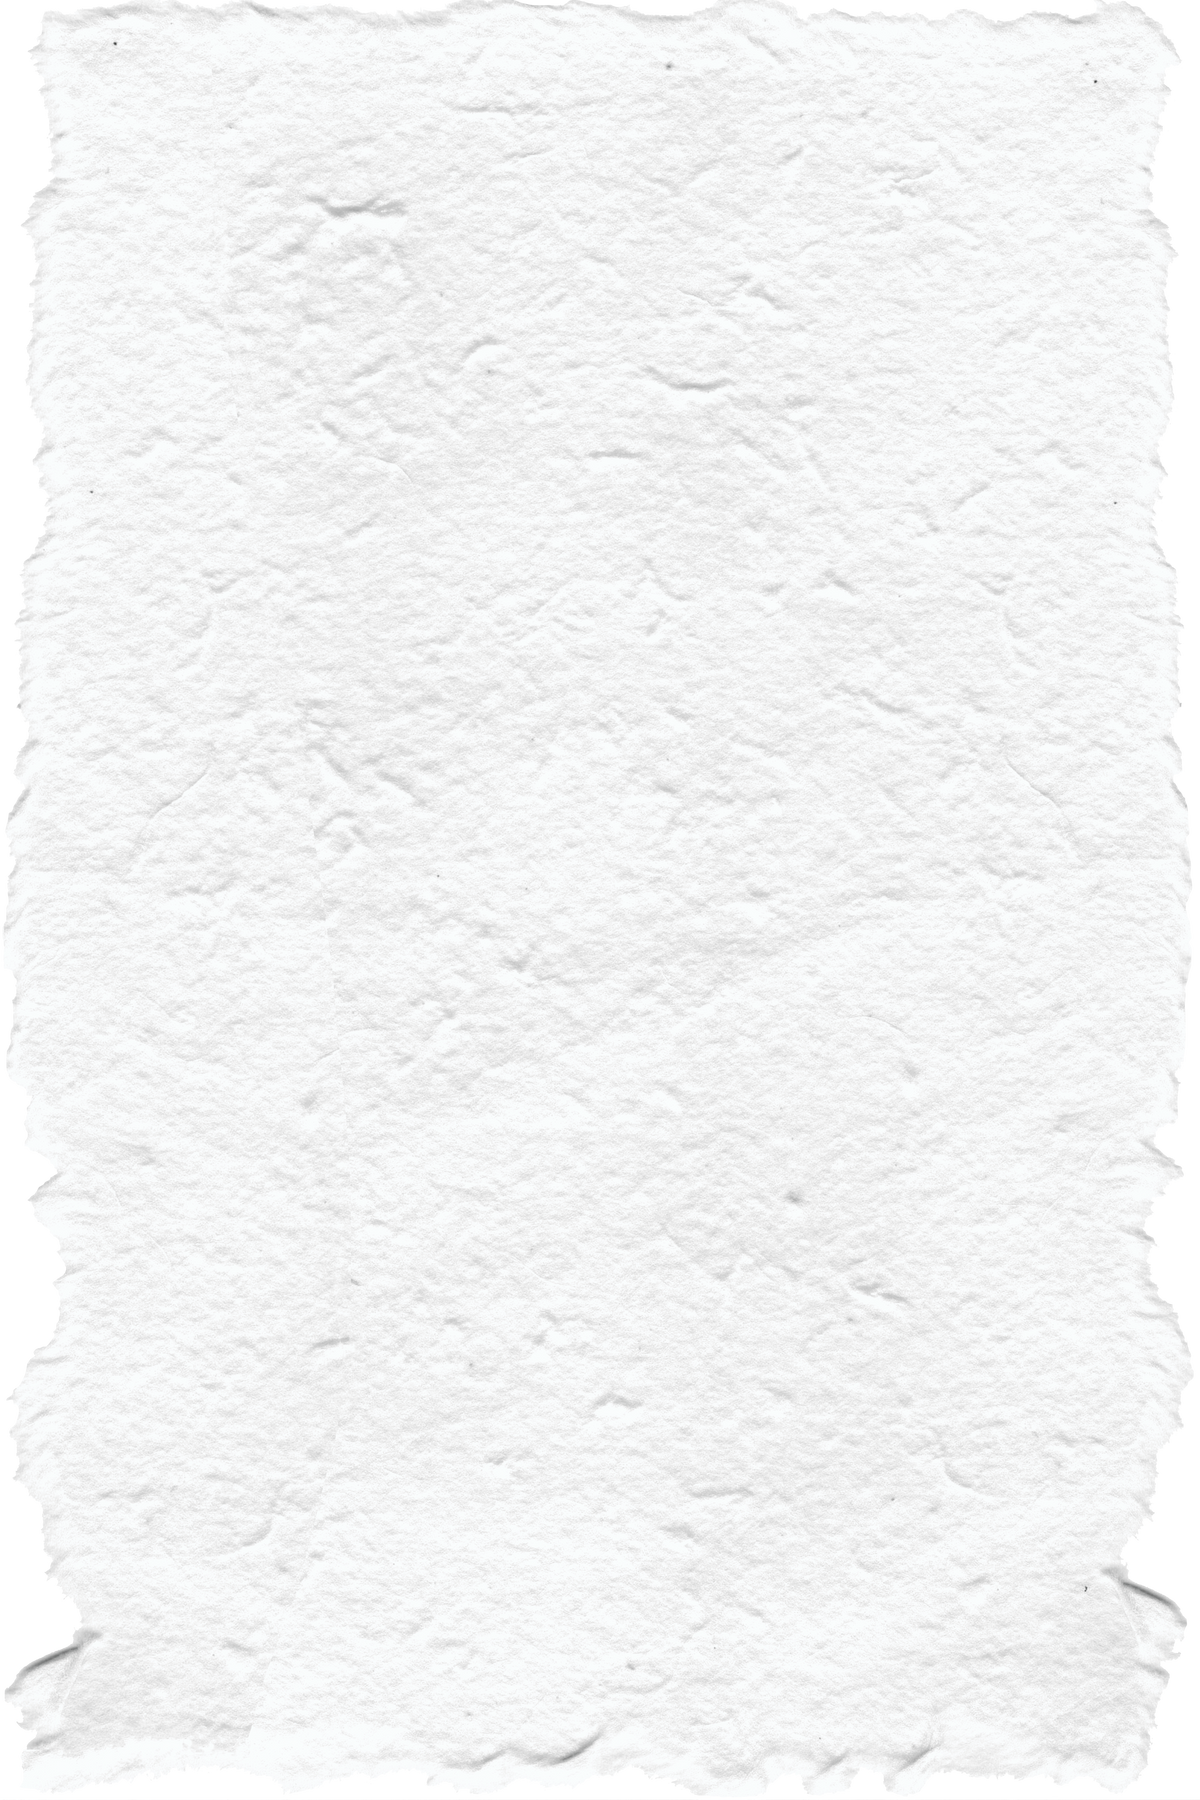 Torn white paper element